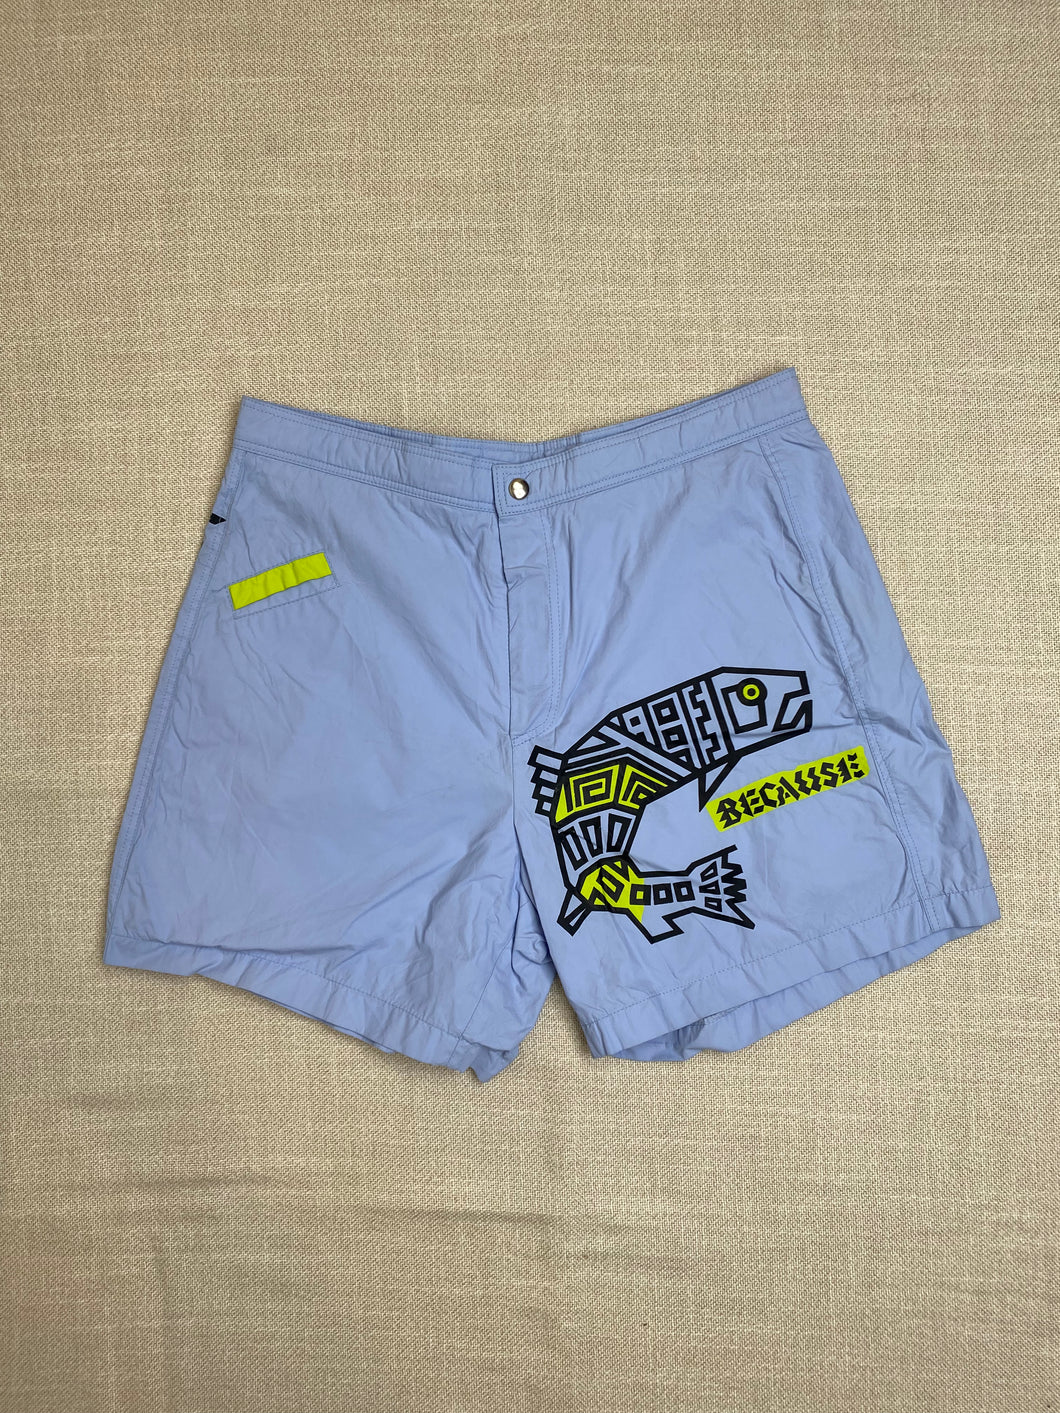 1989 because by HCC shorts blue